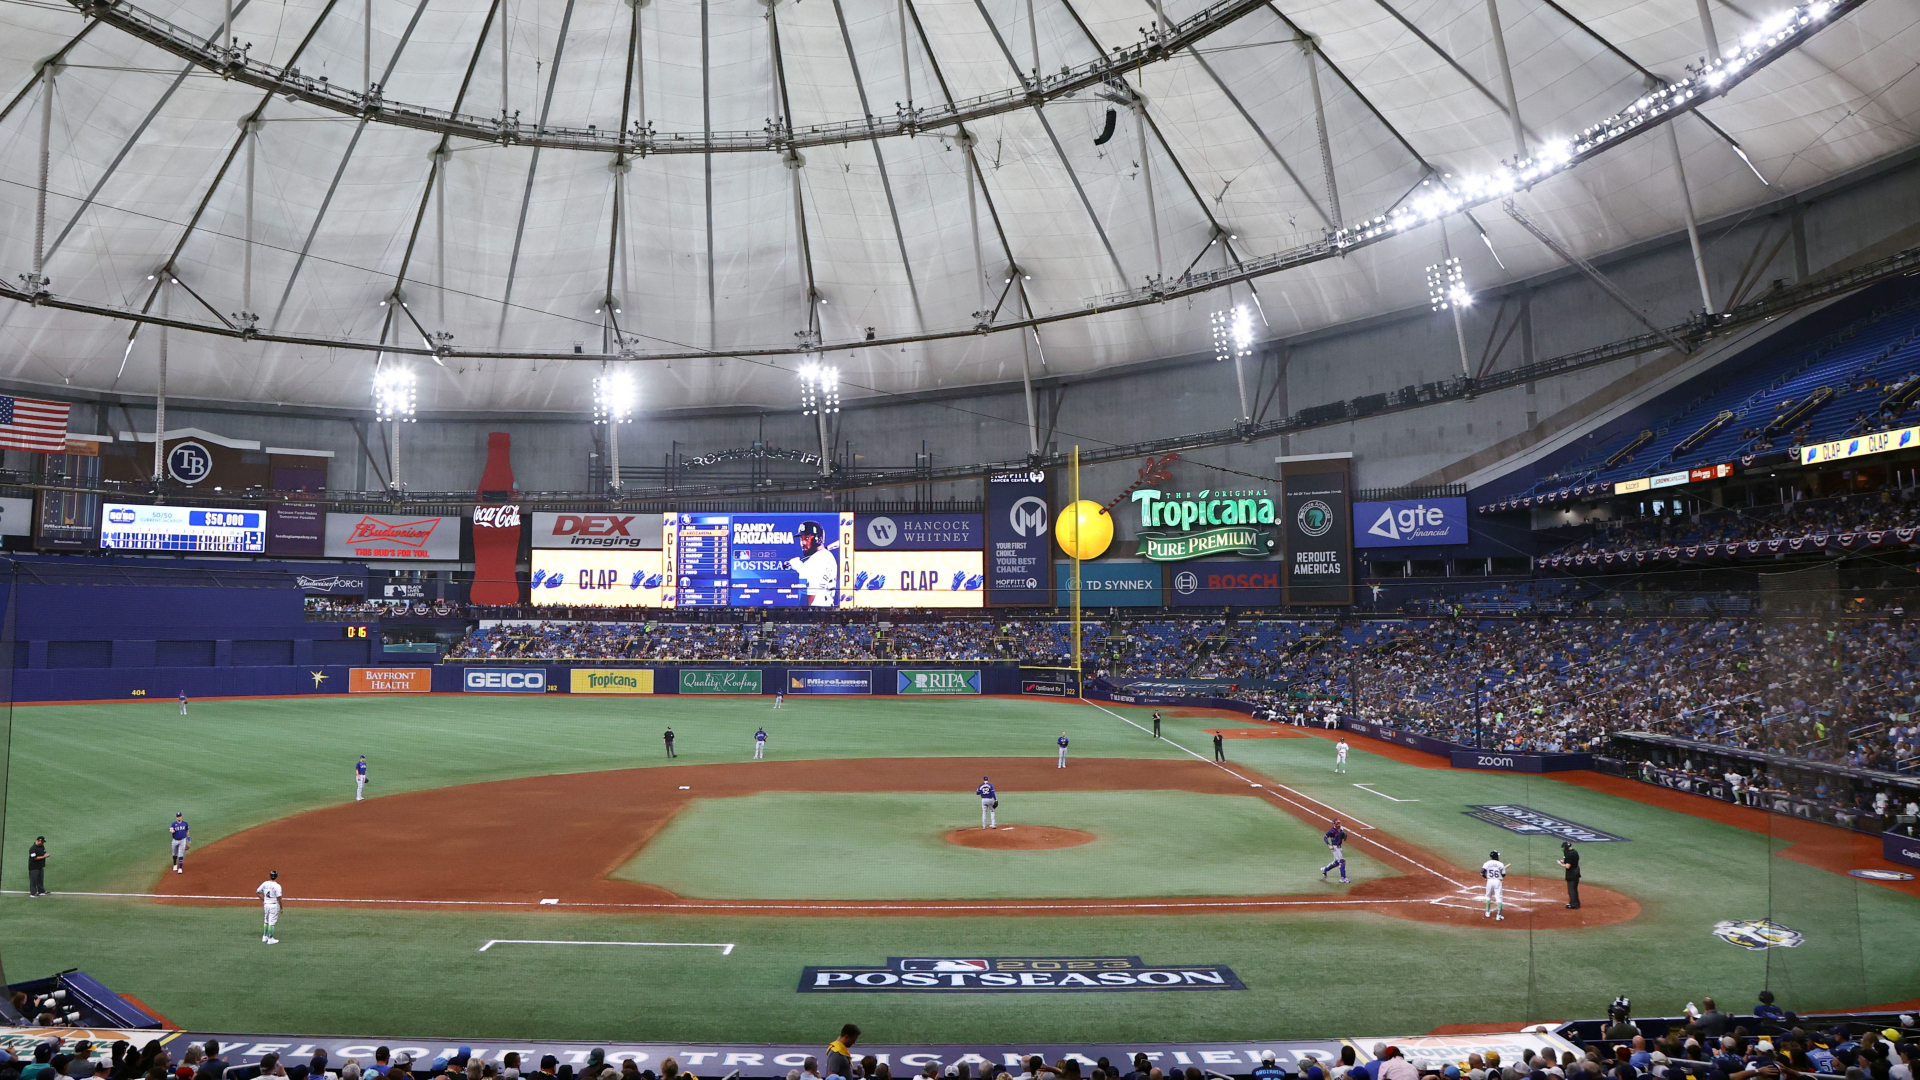 Tough Crowd: Rays Reporter Didn’t Like Criticism Of Team’s
Attendance